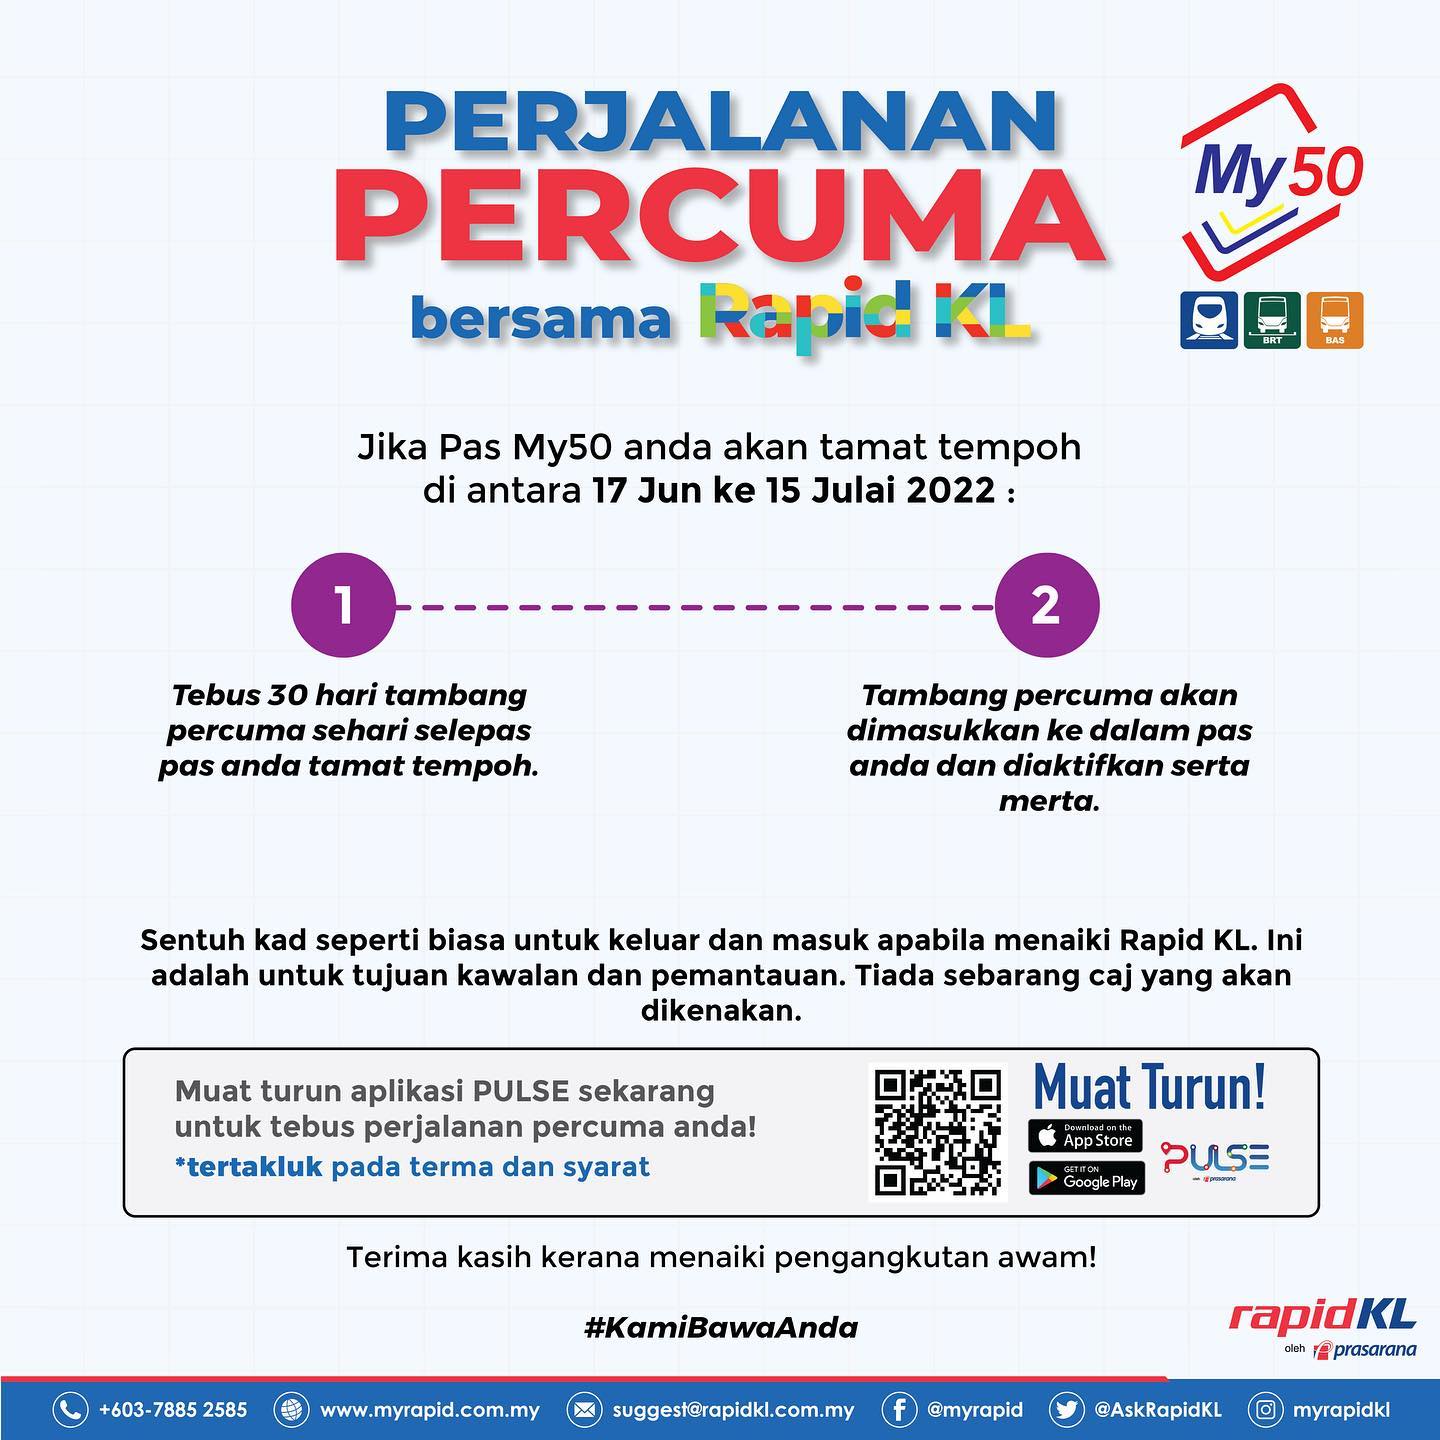 Those who have already renewed their My50 passes can still enjoy 30 days of free rides. Image credit: RapidKL